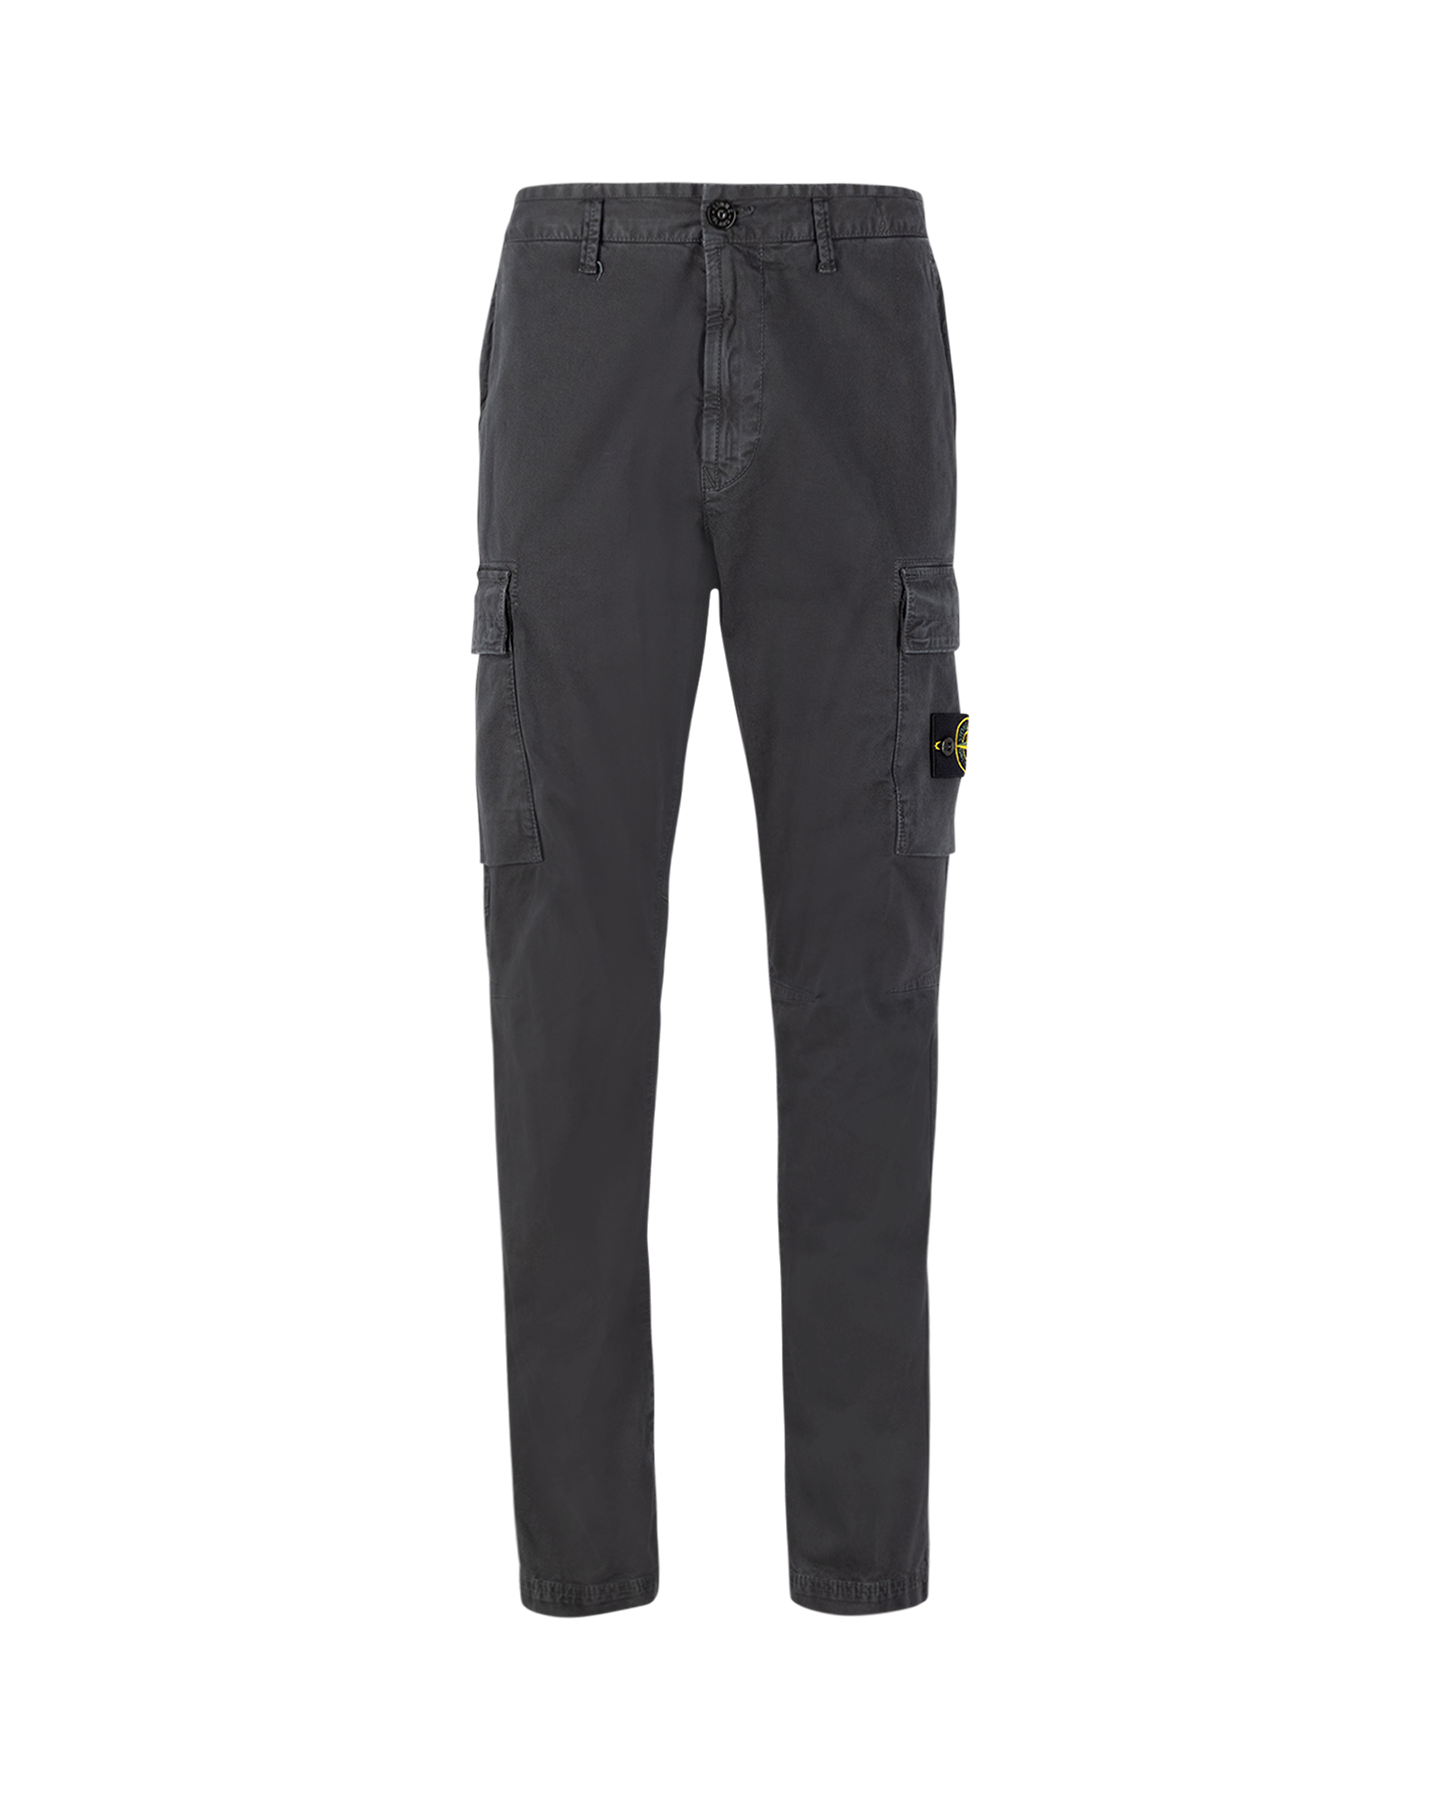 Stone Island 30404 Organic Cotton Stretch Broken Twill Garment Dyed 'Old' Effect Regular Tapered Cargo Pants DONKERGRIJS 1